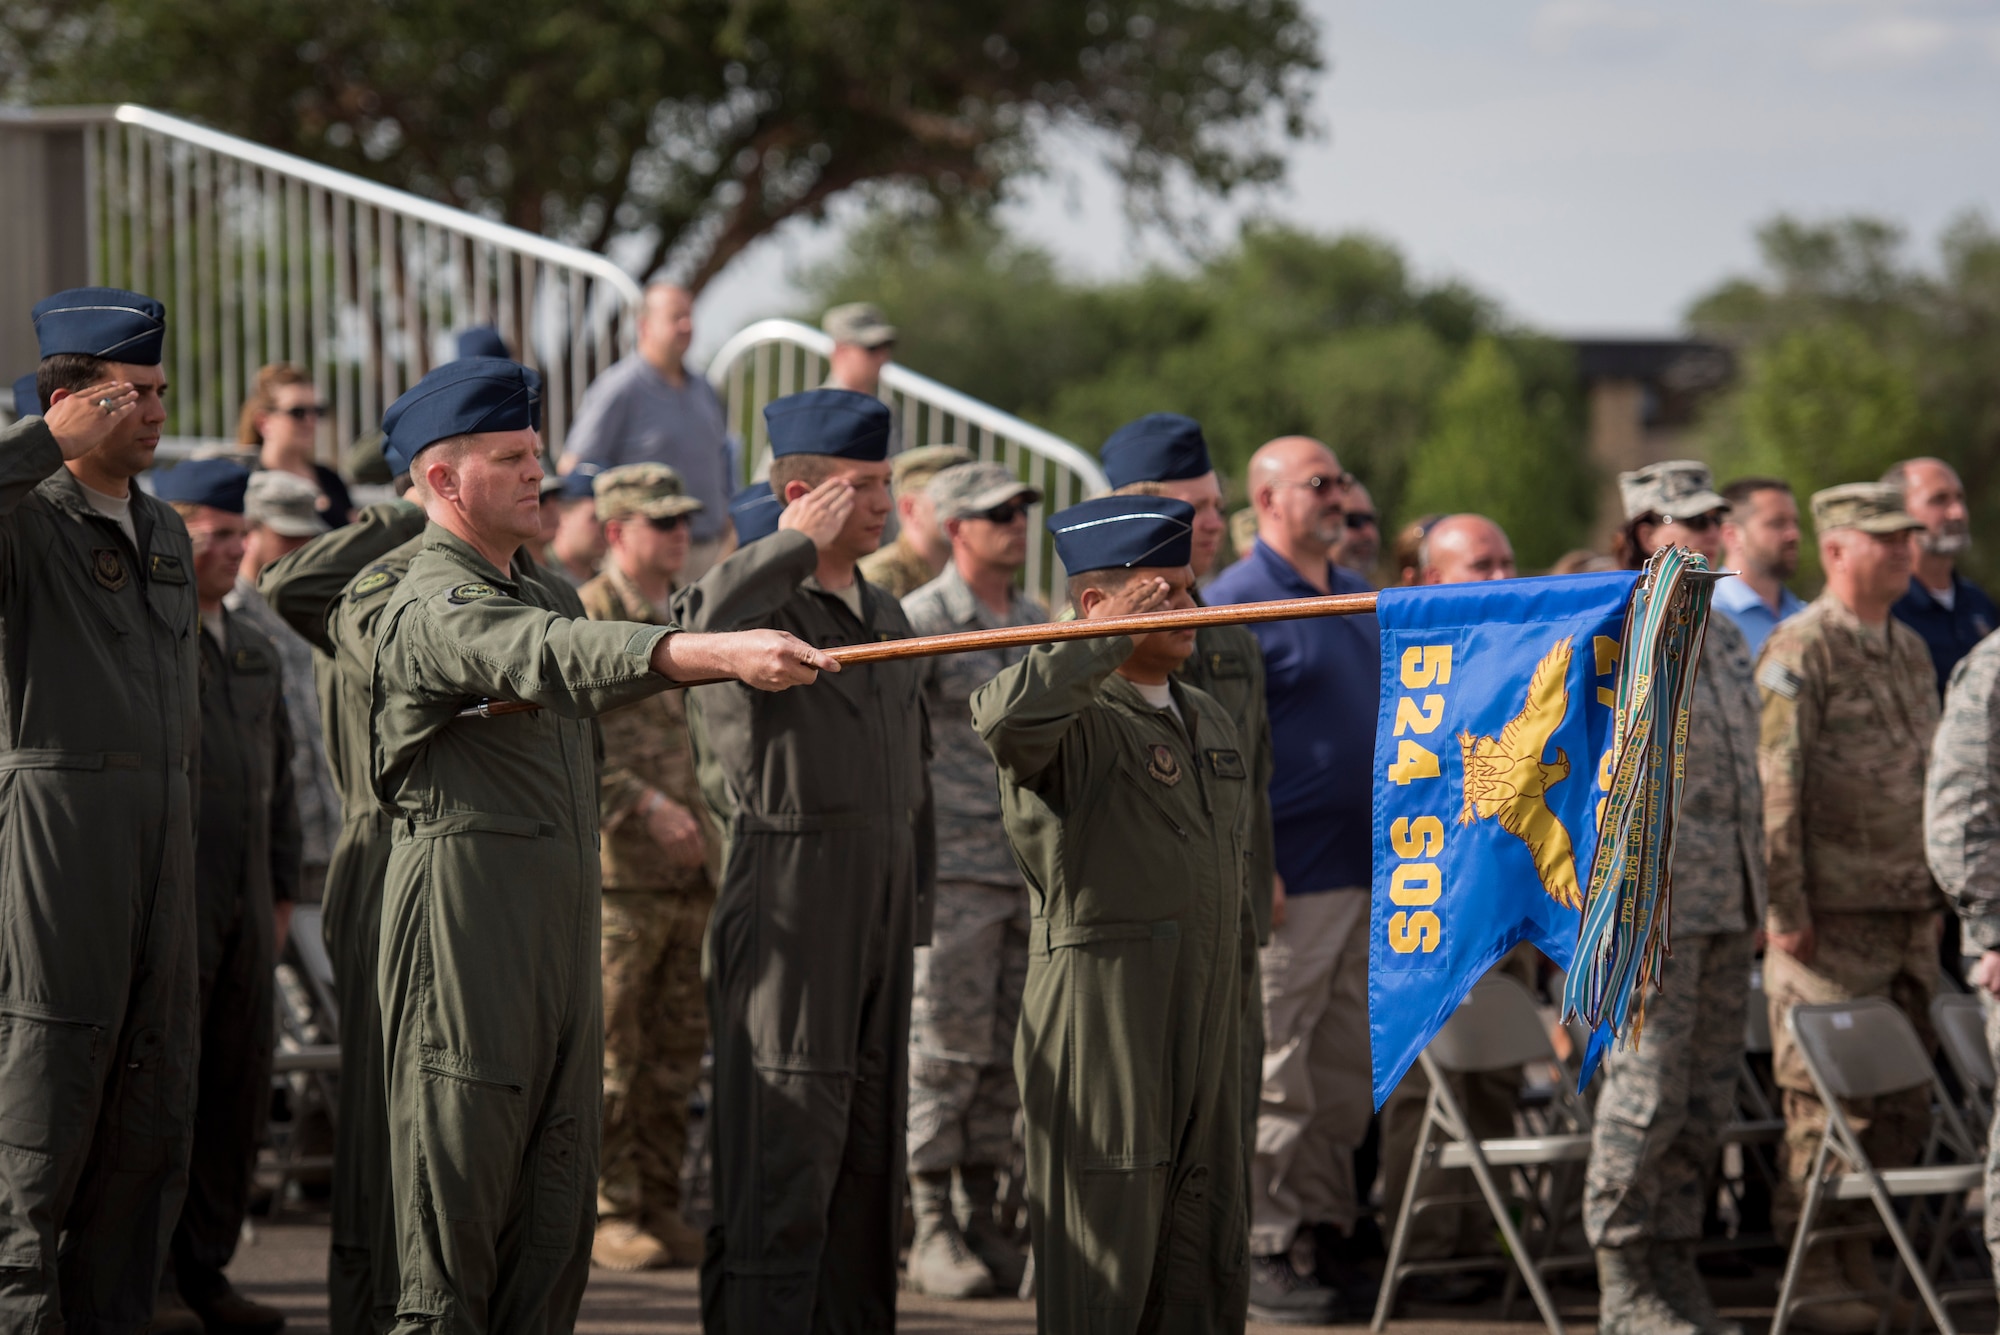 Members of the 524th Special Operations Squadron render salutes during an end of mission ceremony at the 27th Special Operations Wing building May 31, 2017 at Cannon Air Force Base, N.M. The 524th is relocating to Duke Field, Florida, where the command will change hands from the 27th SOW to the 492nd SOW. The ceremony is also historical as the 524th is the last remaining squadron on the base that has original ties to the 27th SOW. (U.S. Air Force photo by Staff Sgt. Michael Washburn/Released)